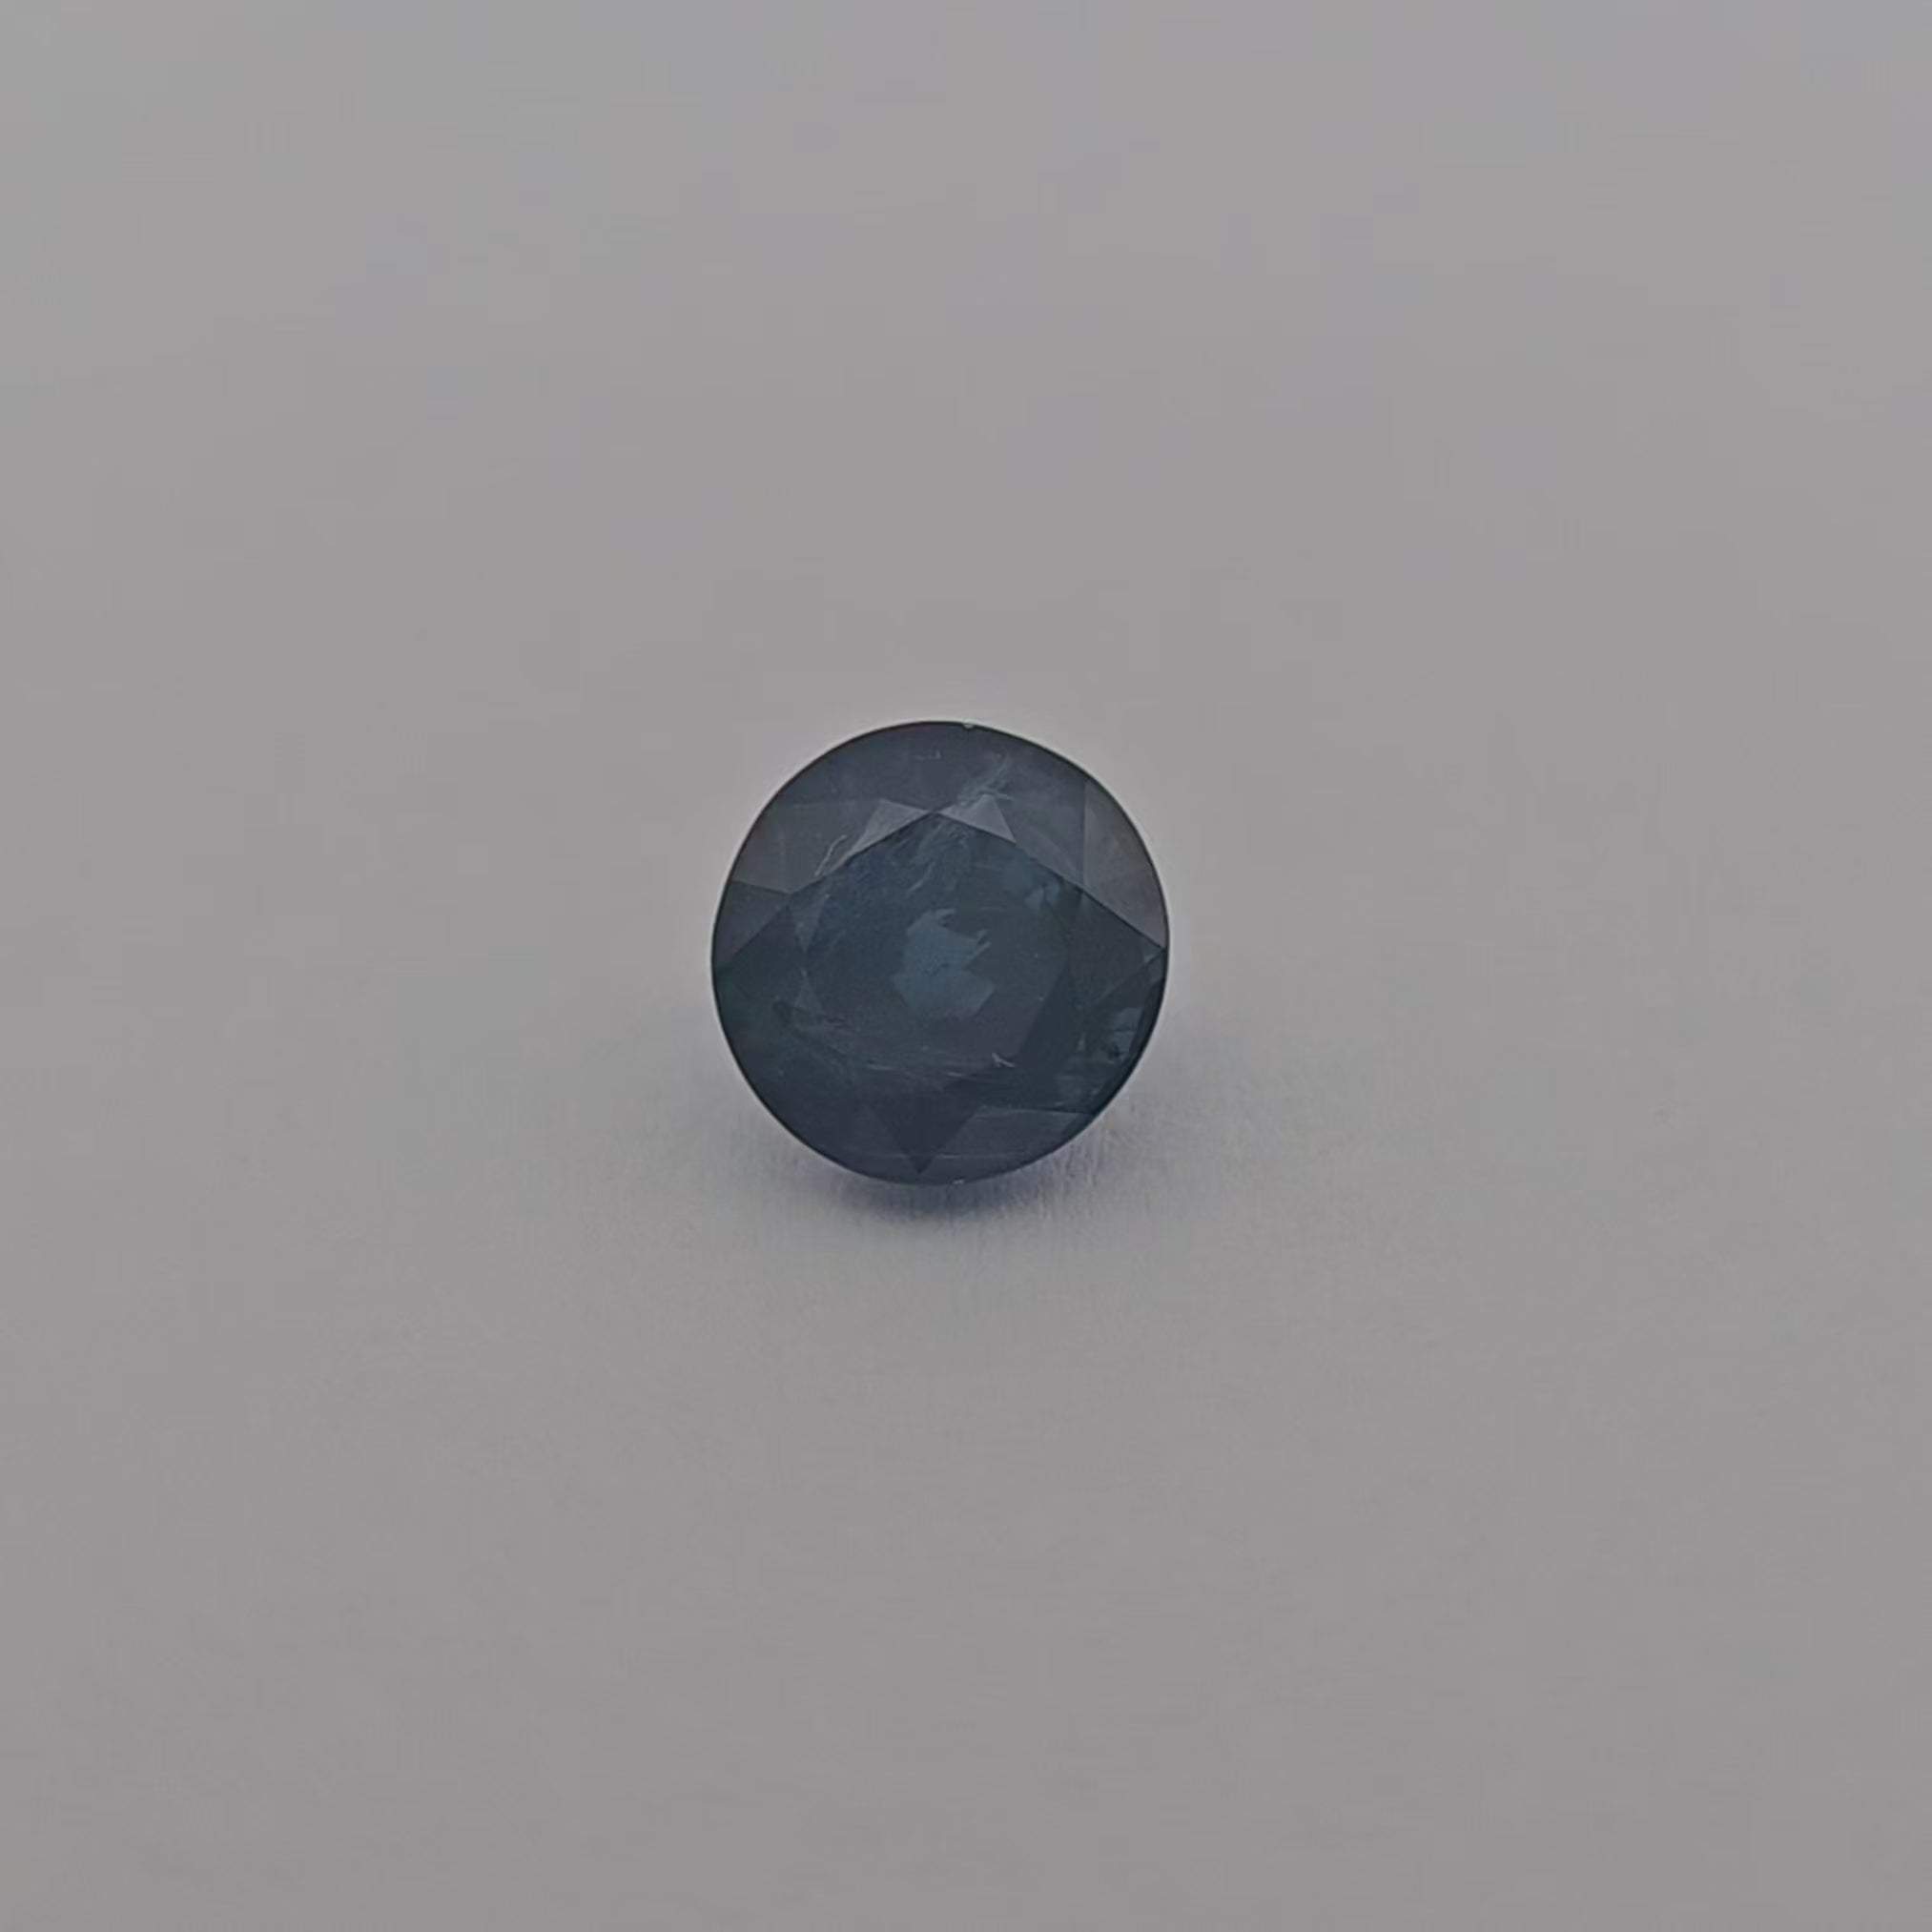 loose Natural Blue Sapphire Stone 1.92 Carats Round Shape 7mm